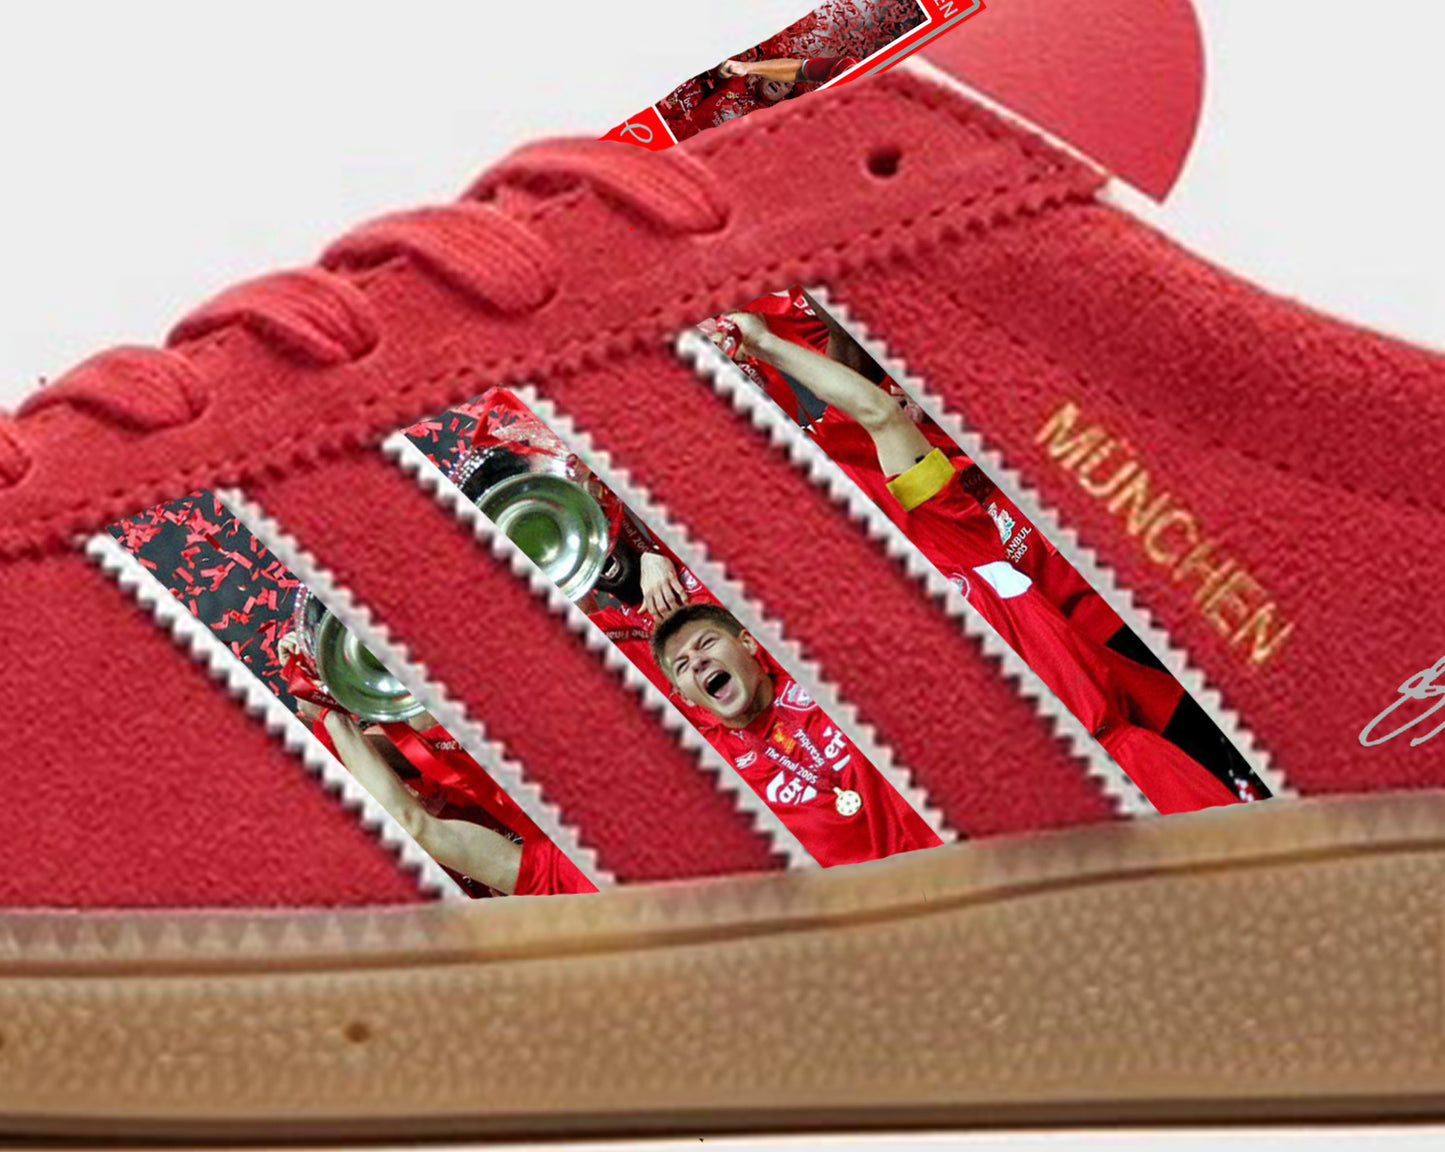 Limited edition Liverpool FC Steven Gerrard Istanbul `05 Adidas Munchen red custom trainers / sneakers